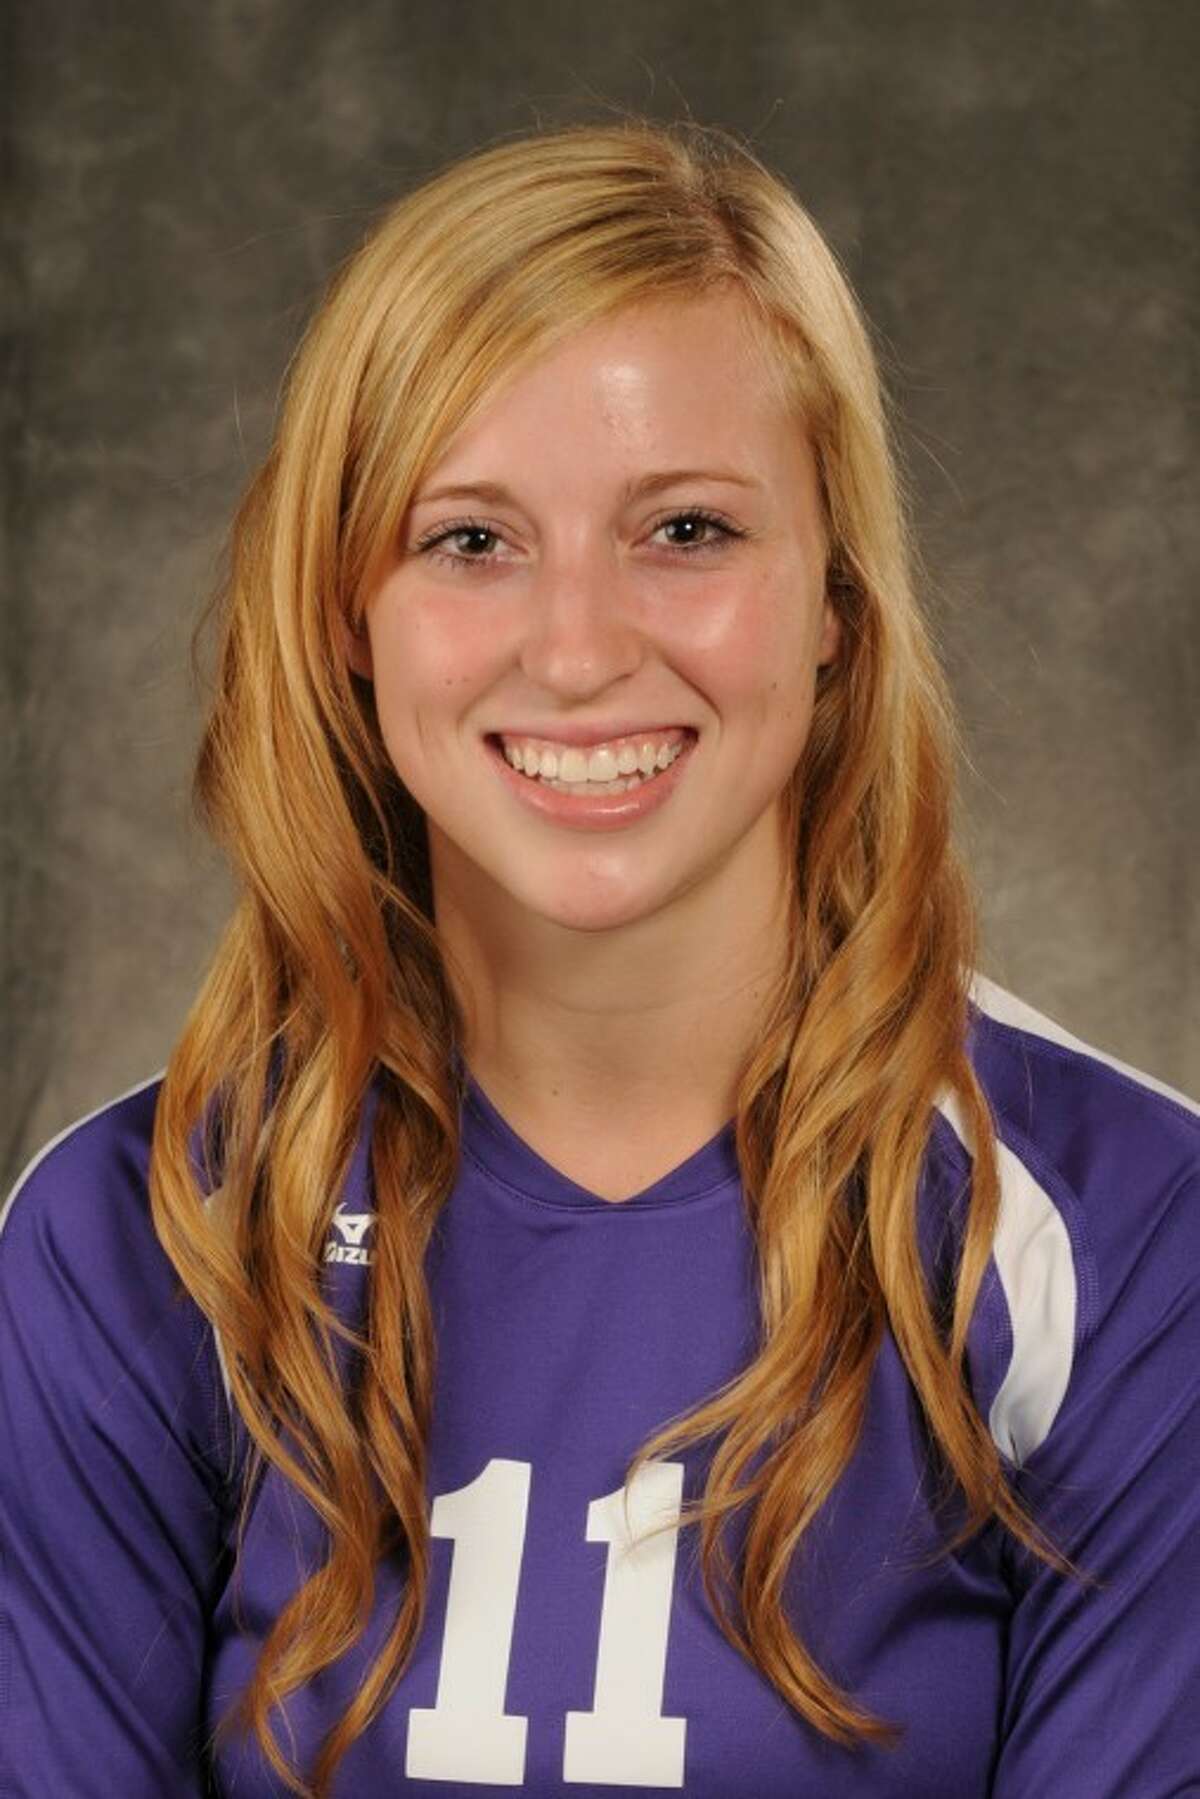 Magnolia grad Paige Holland had 165 assists in her first four matches as the setter for Stephen F. Austin's volleyball team.